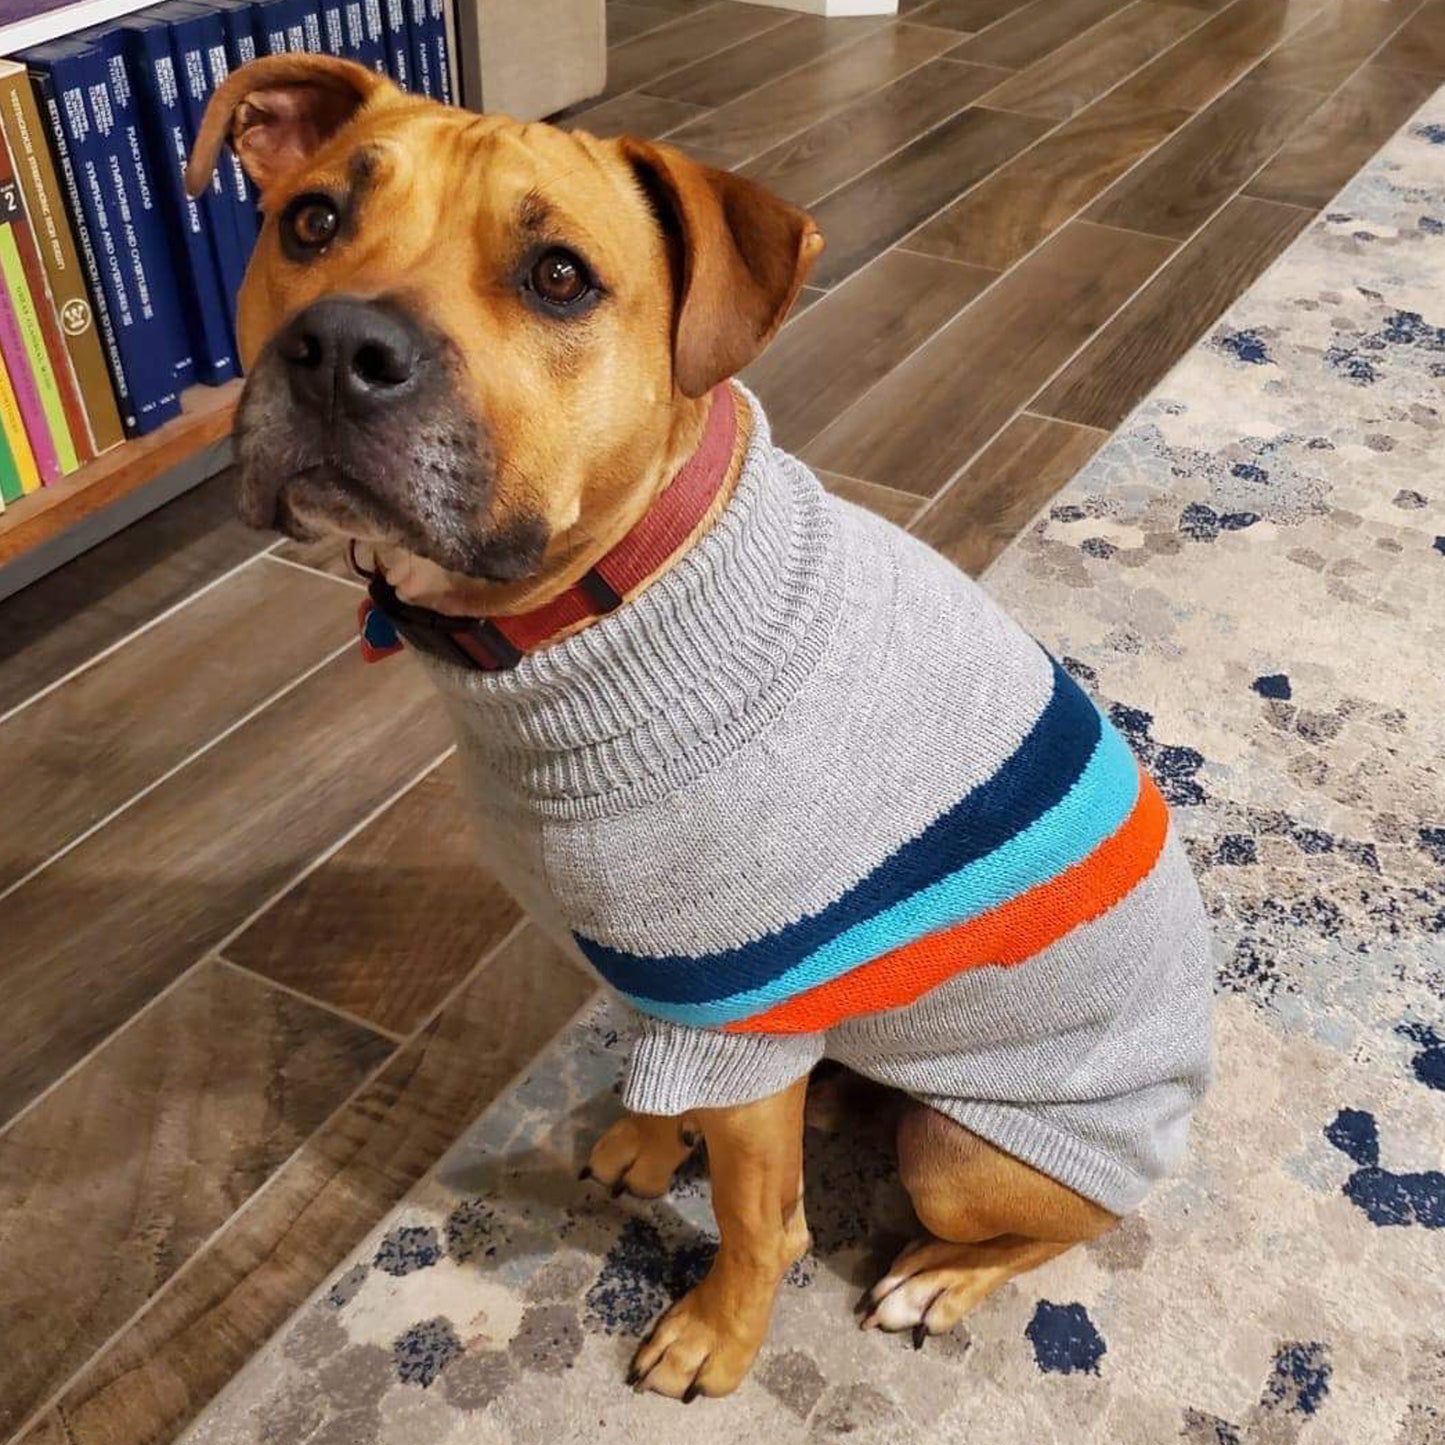 A brown pit bull type dog wearing a grey sweater with colorful chevron , sitting on a rug in a home